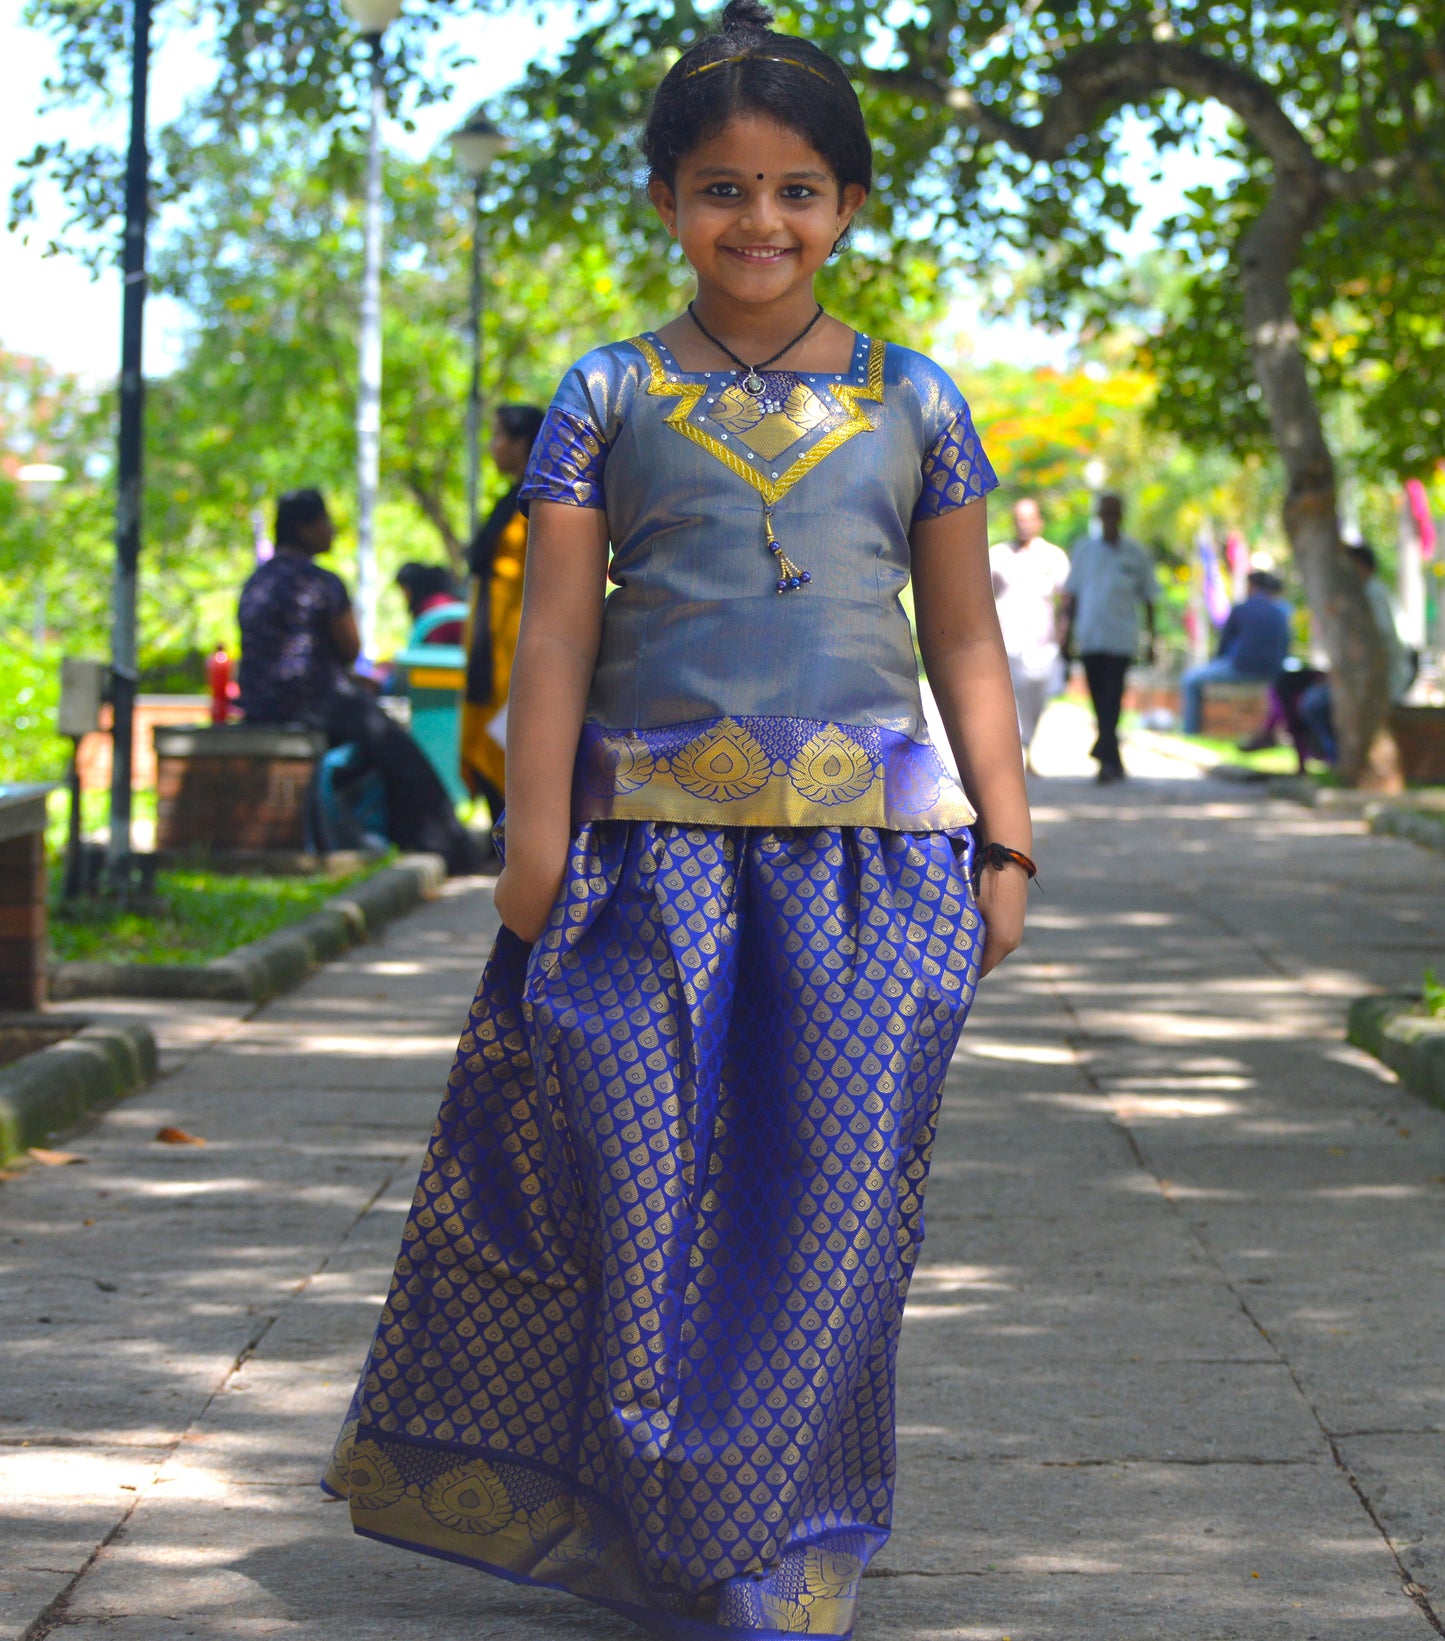 Southloom Blue Pattupavada and Blouse (Traditional Ethnic Skirt and Blouse for Girls)